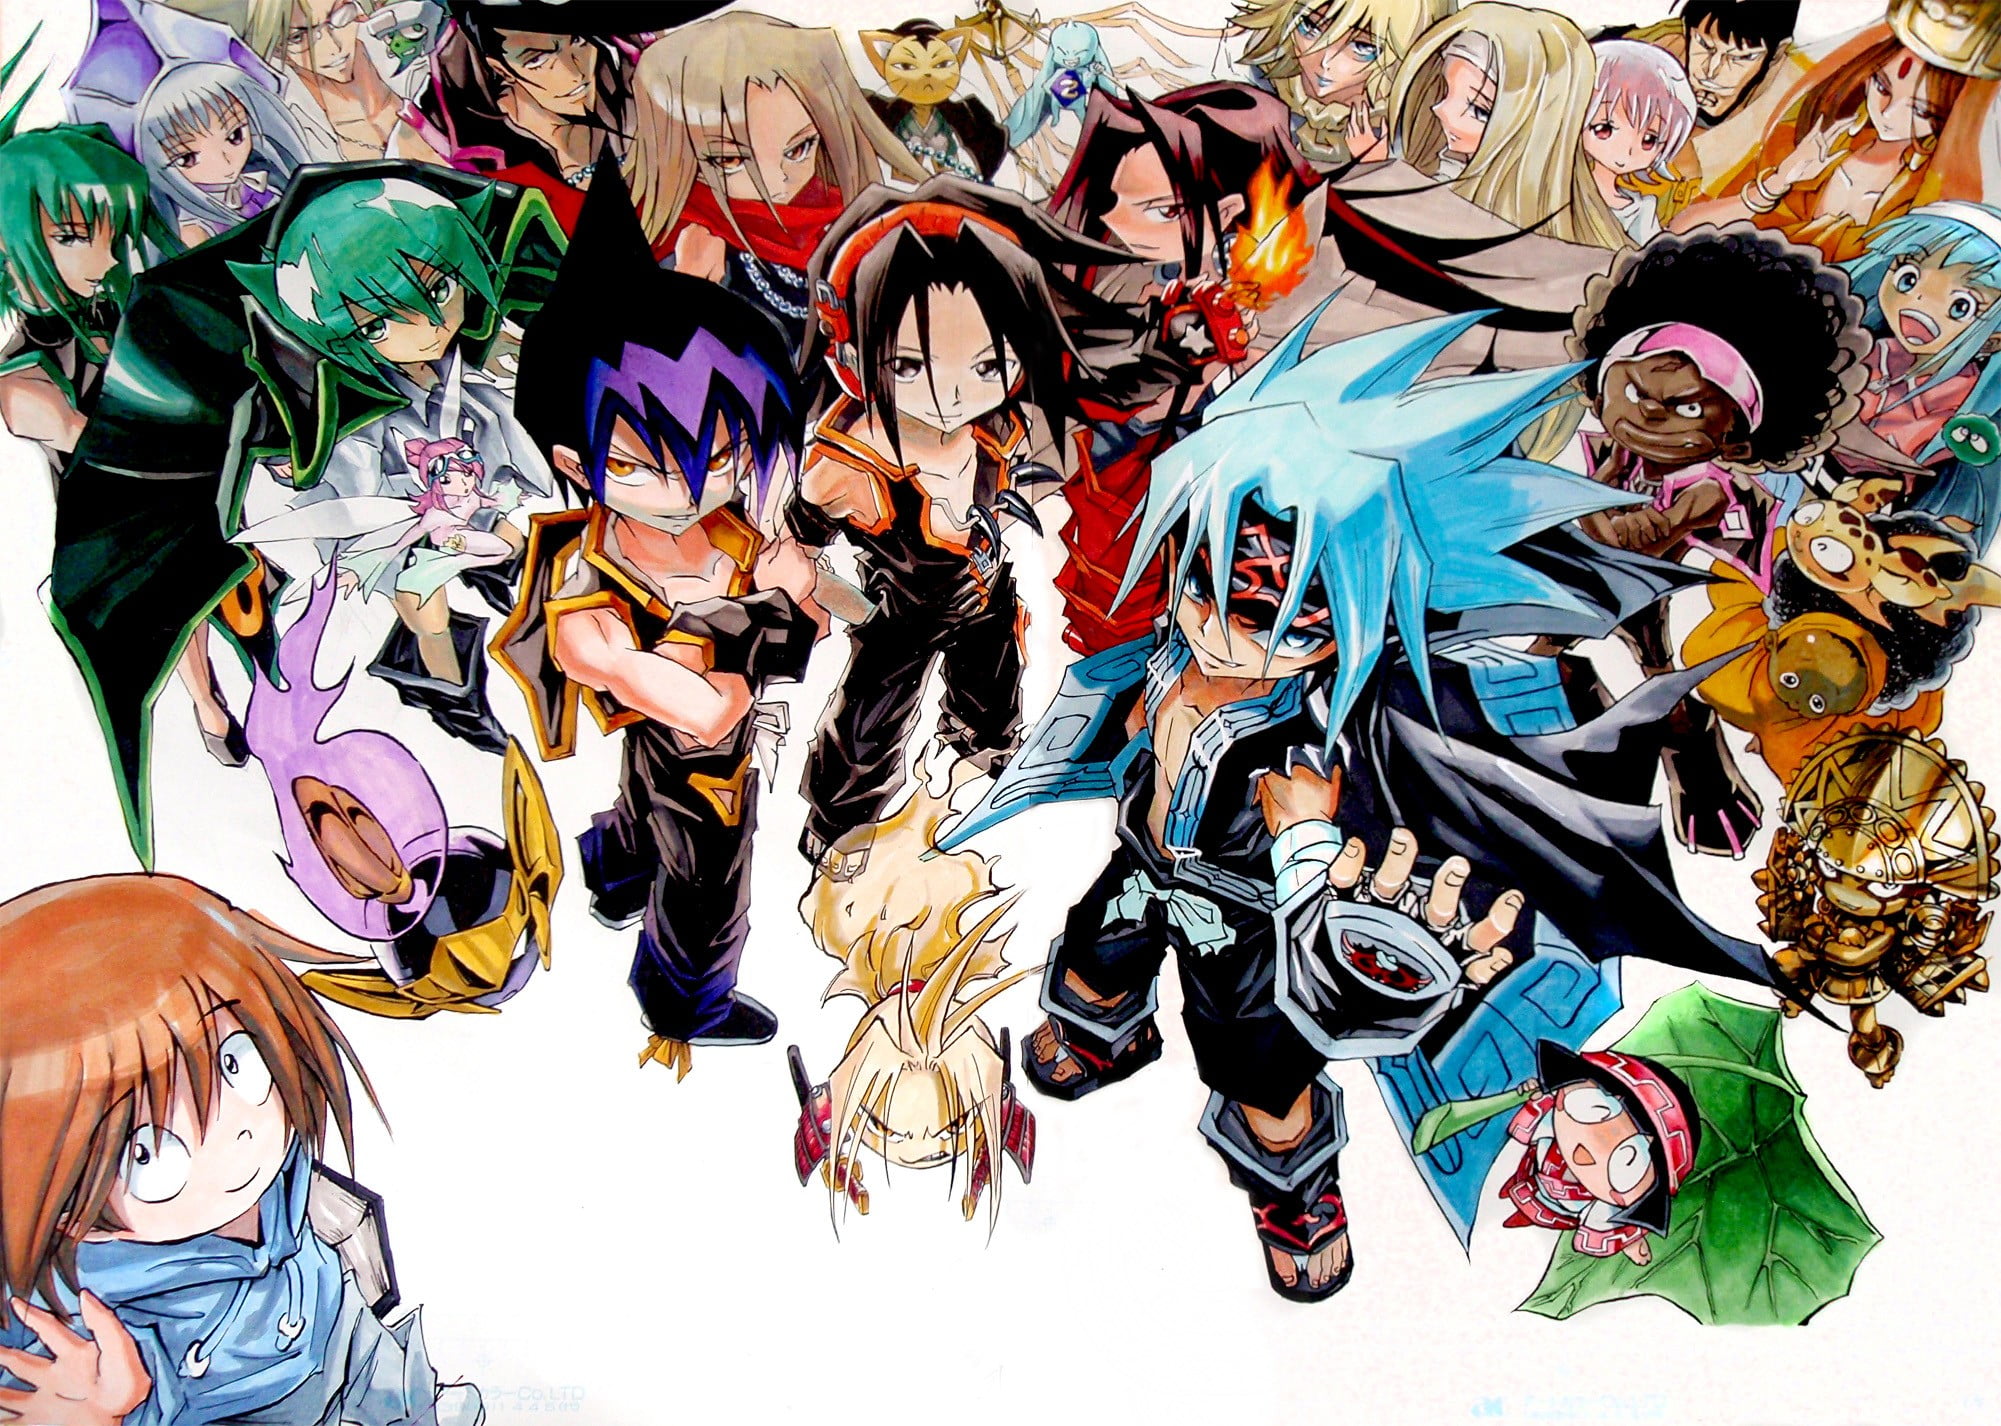 Shaman King reboot heading to Netflix this August  GMA News Online